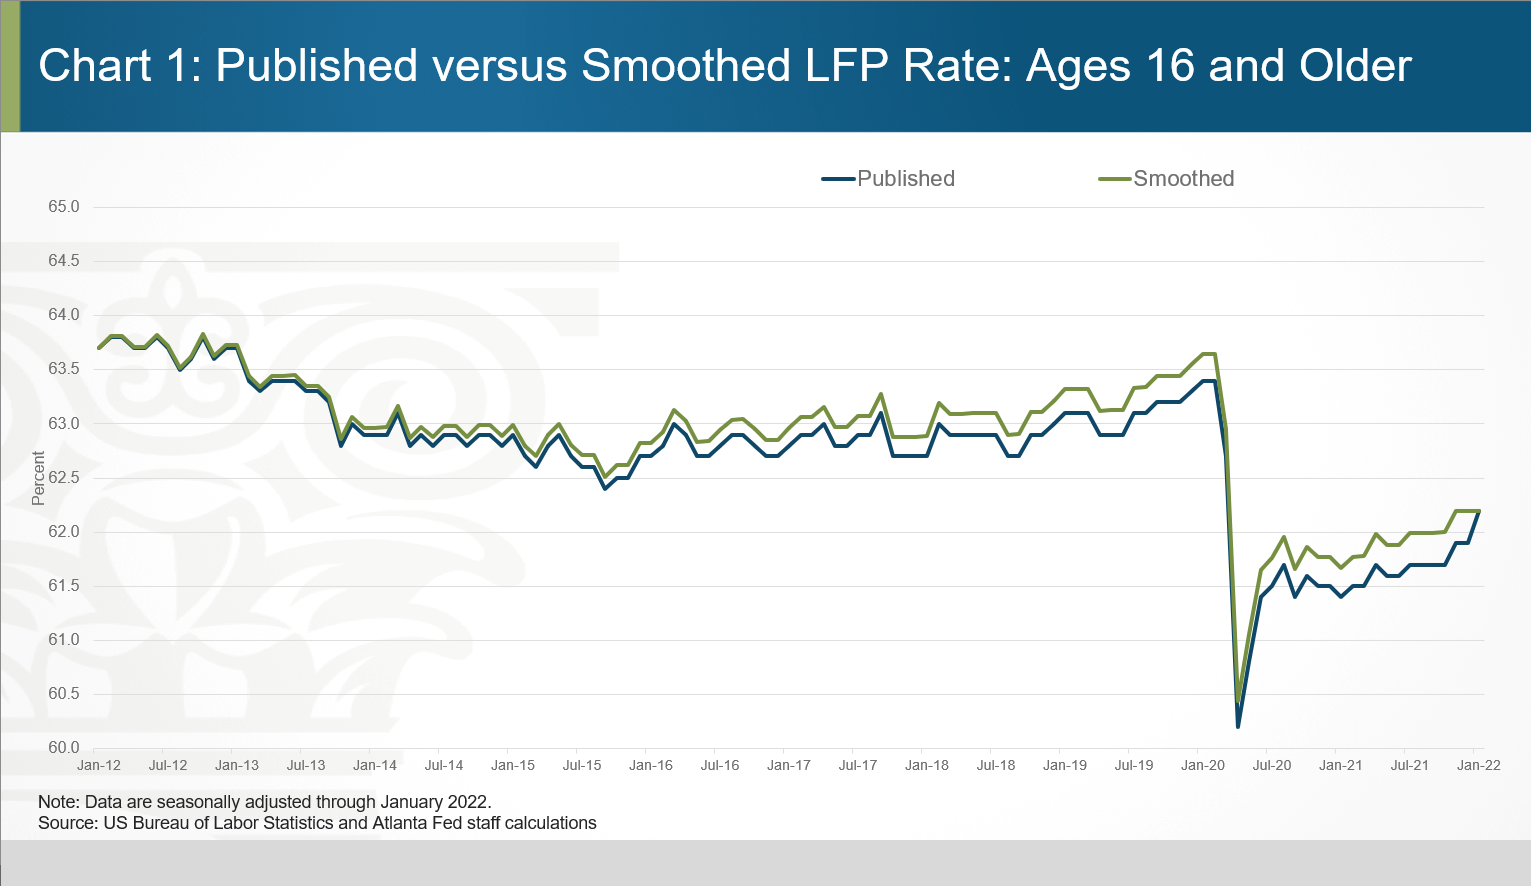 Chart 01 of 06: Published versus Smoothed LFP Rate: Ages 16 and Older